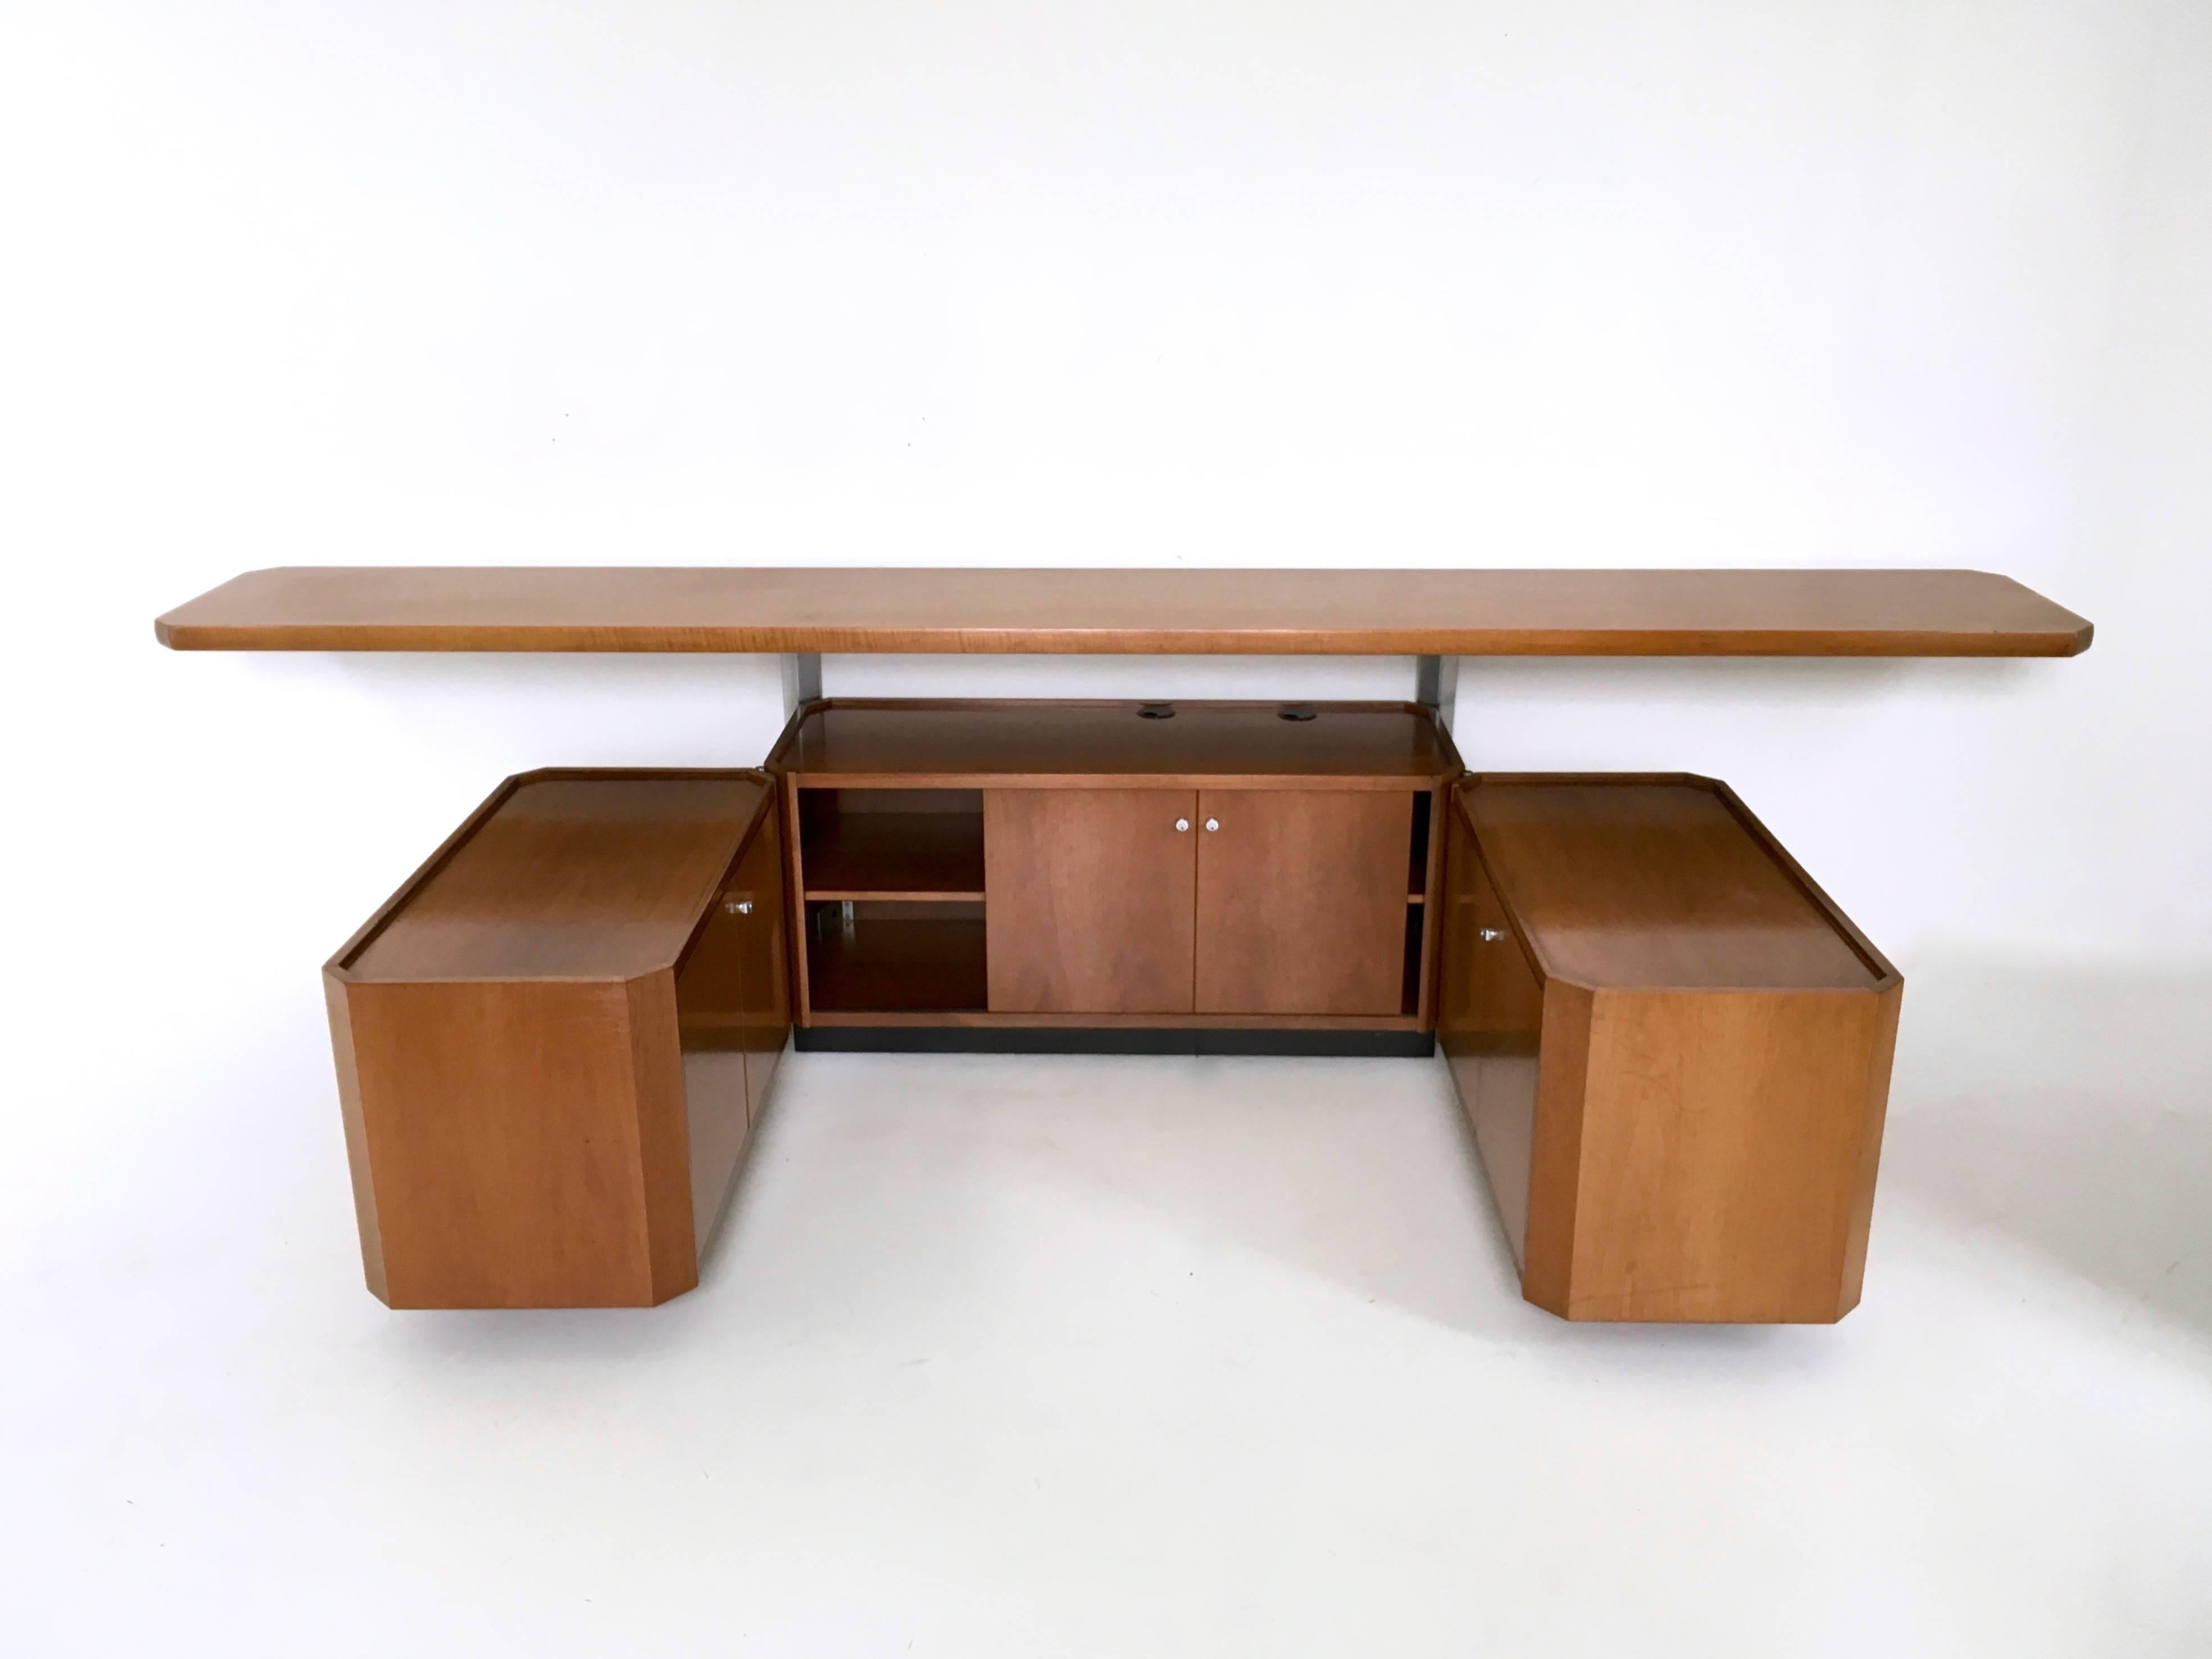 Made from walnut, with chromed metal parts.
The previous owner used it as a Tv stand so it has holes for wires.
It is labelled TECNO.
In perfect condition.